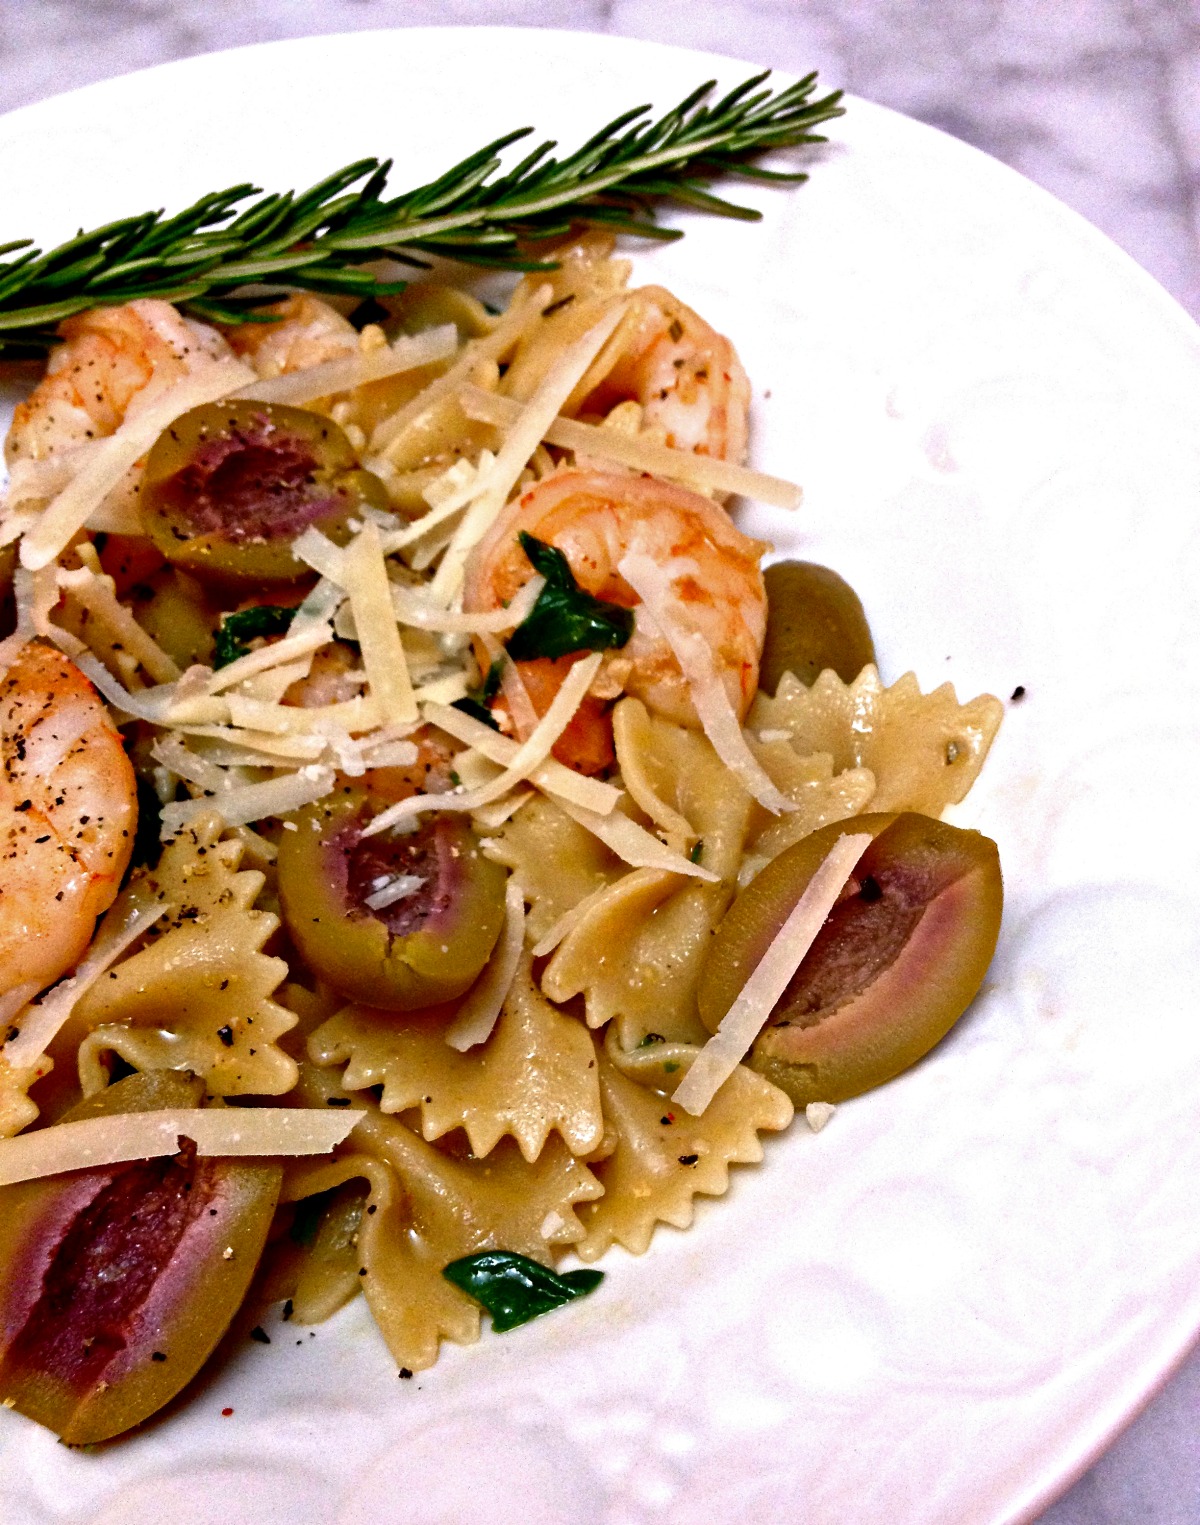 bowtie pasta with shrimp, olives, and rosemary :: by radish*rose